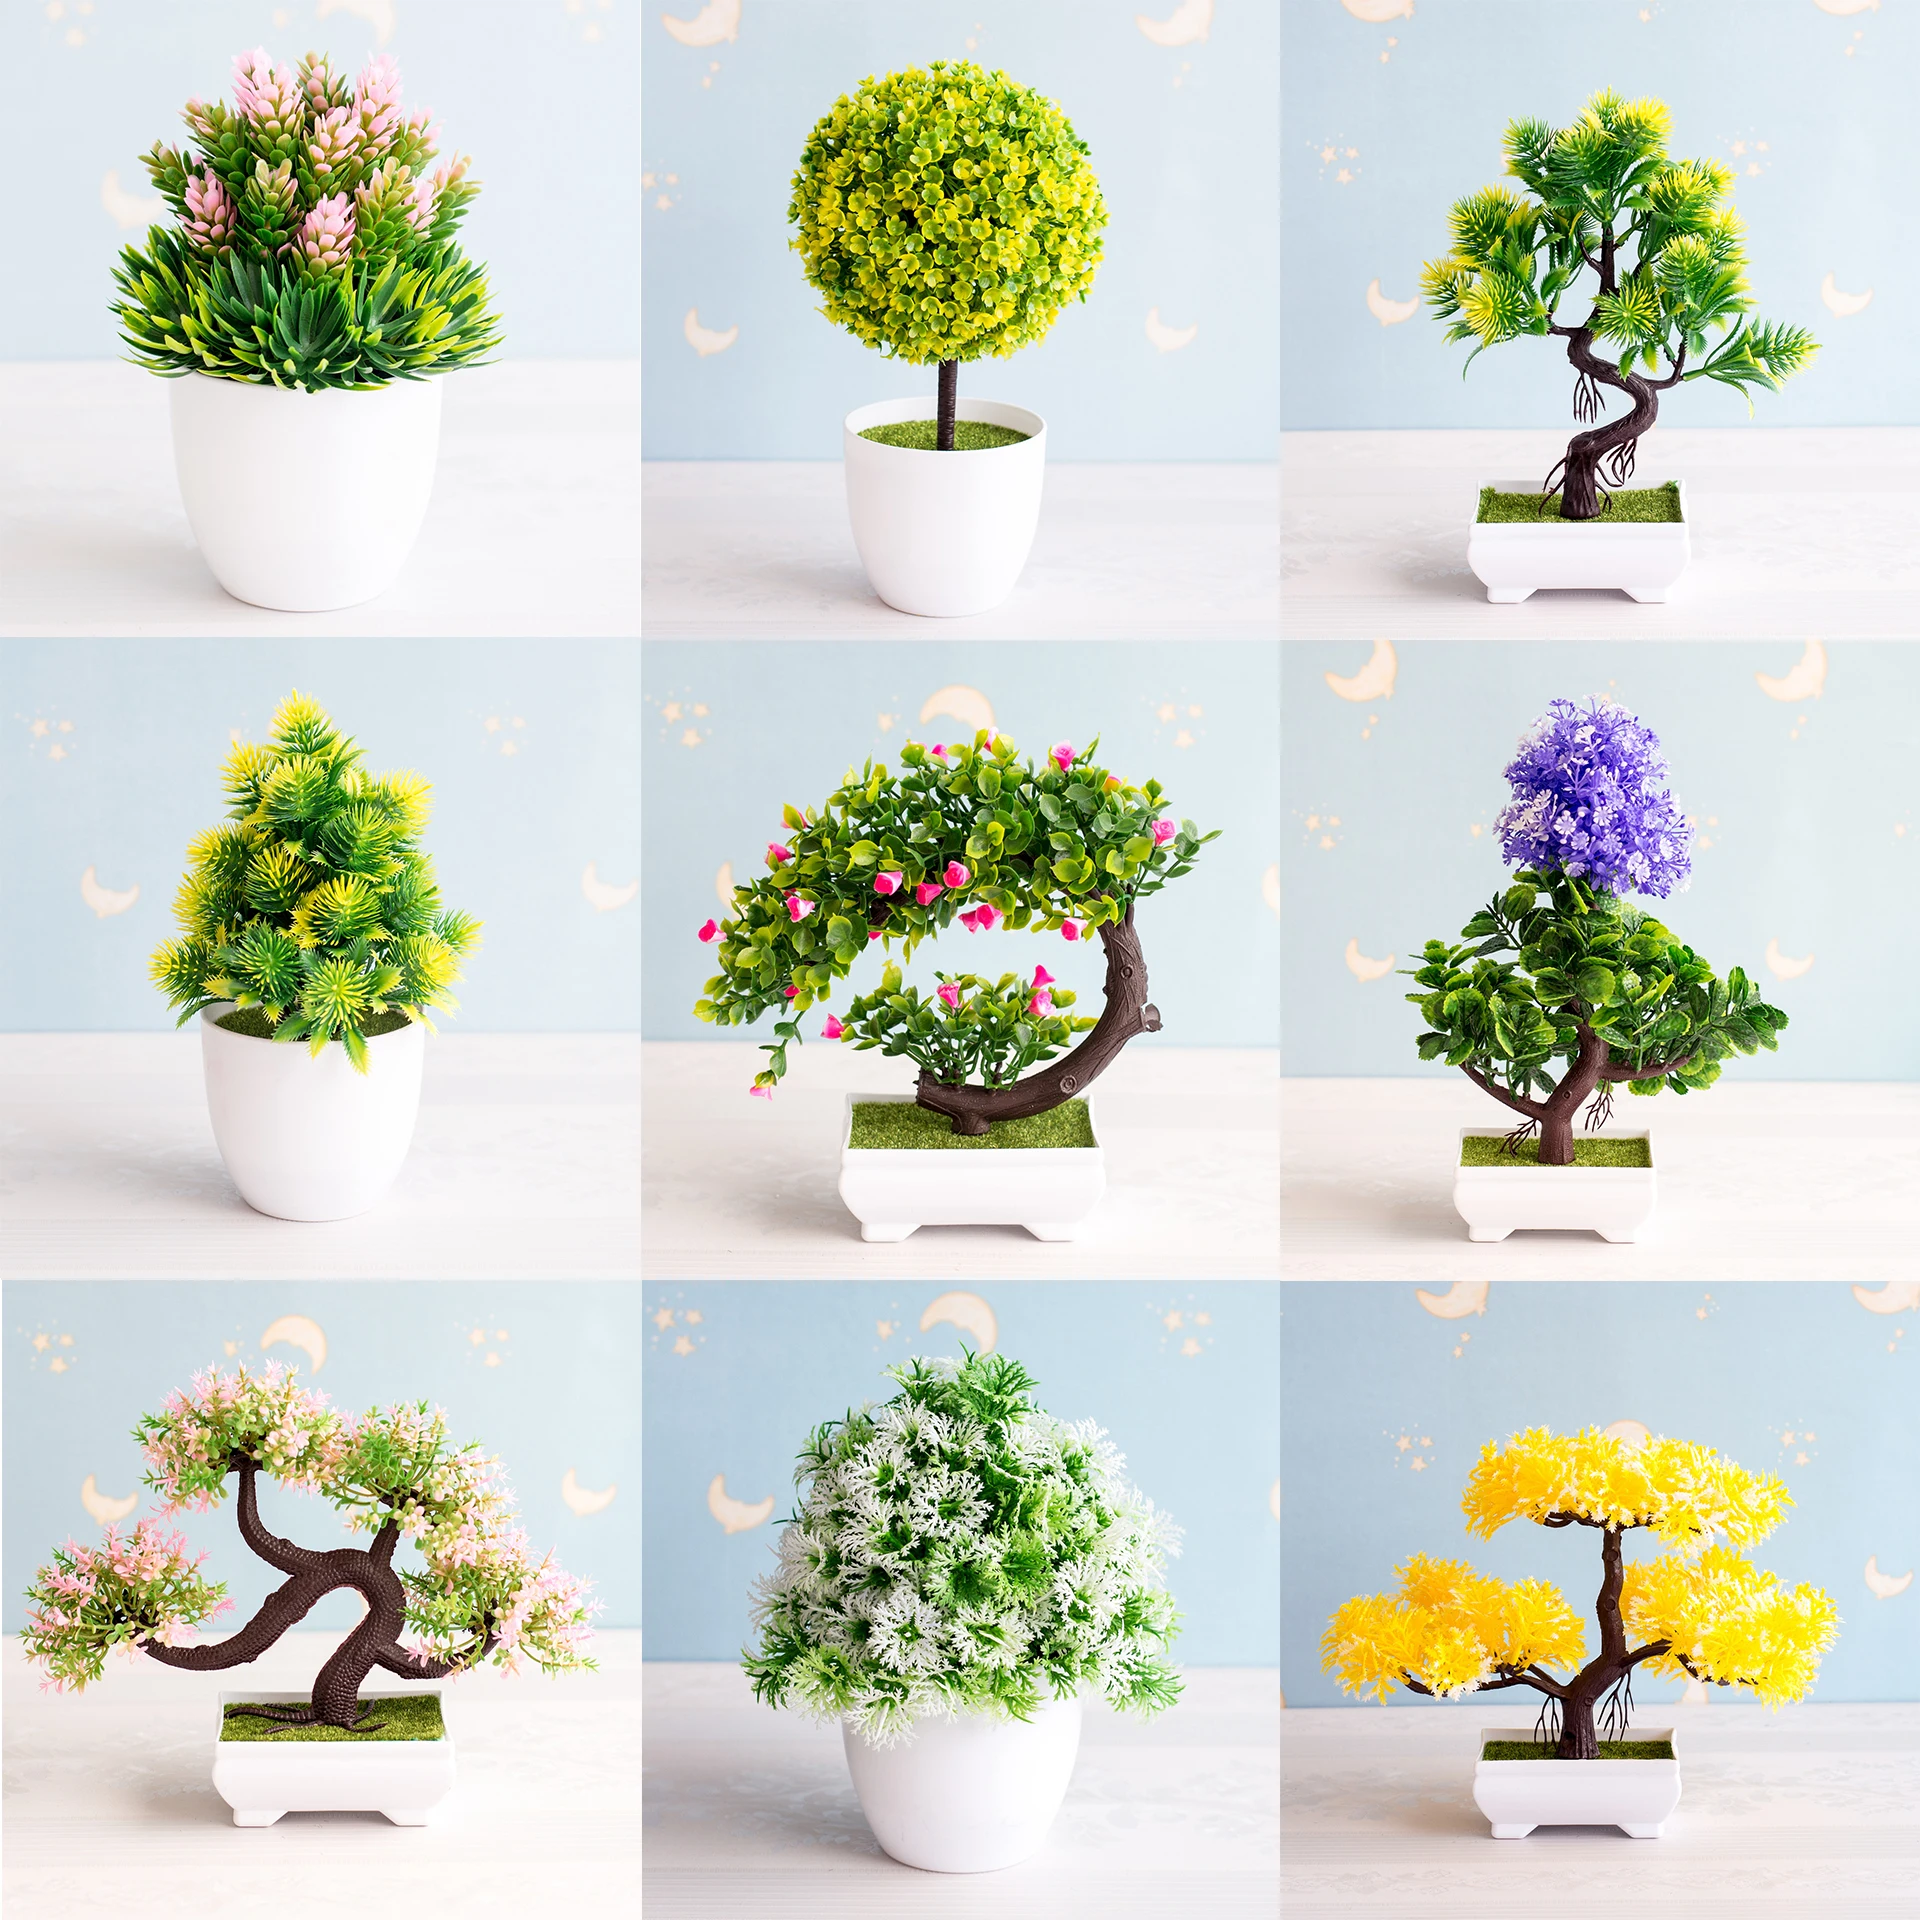 NEW Artificial Plants Bonsai Small Tree Pot Plants Fake Flowers Potted 